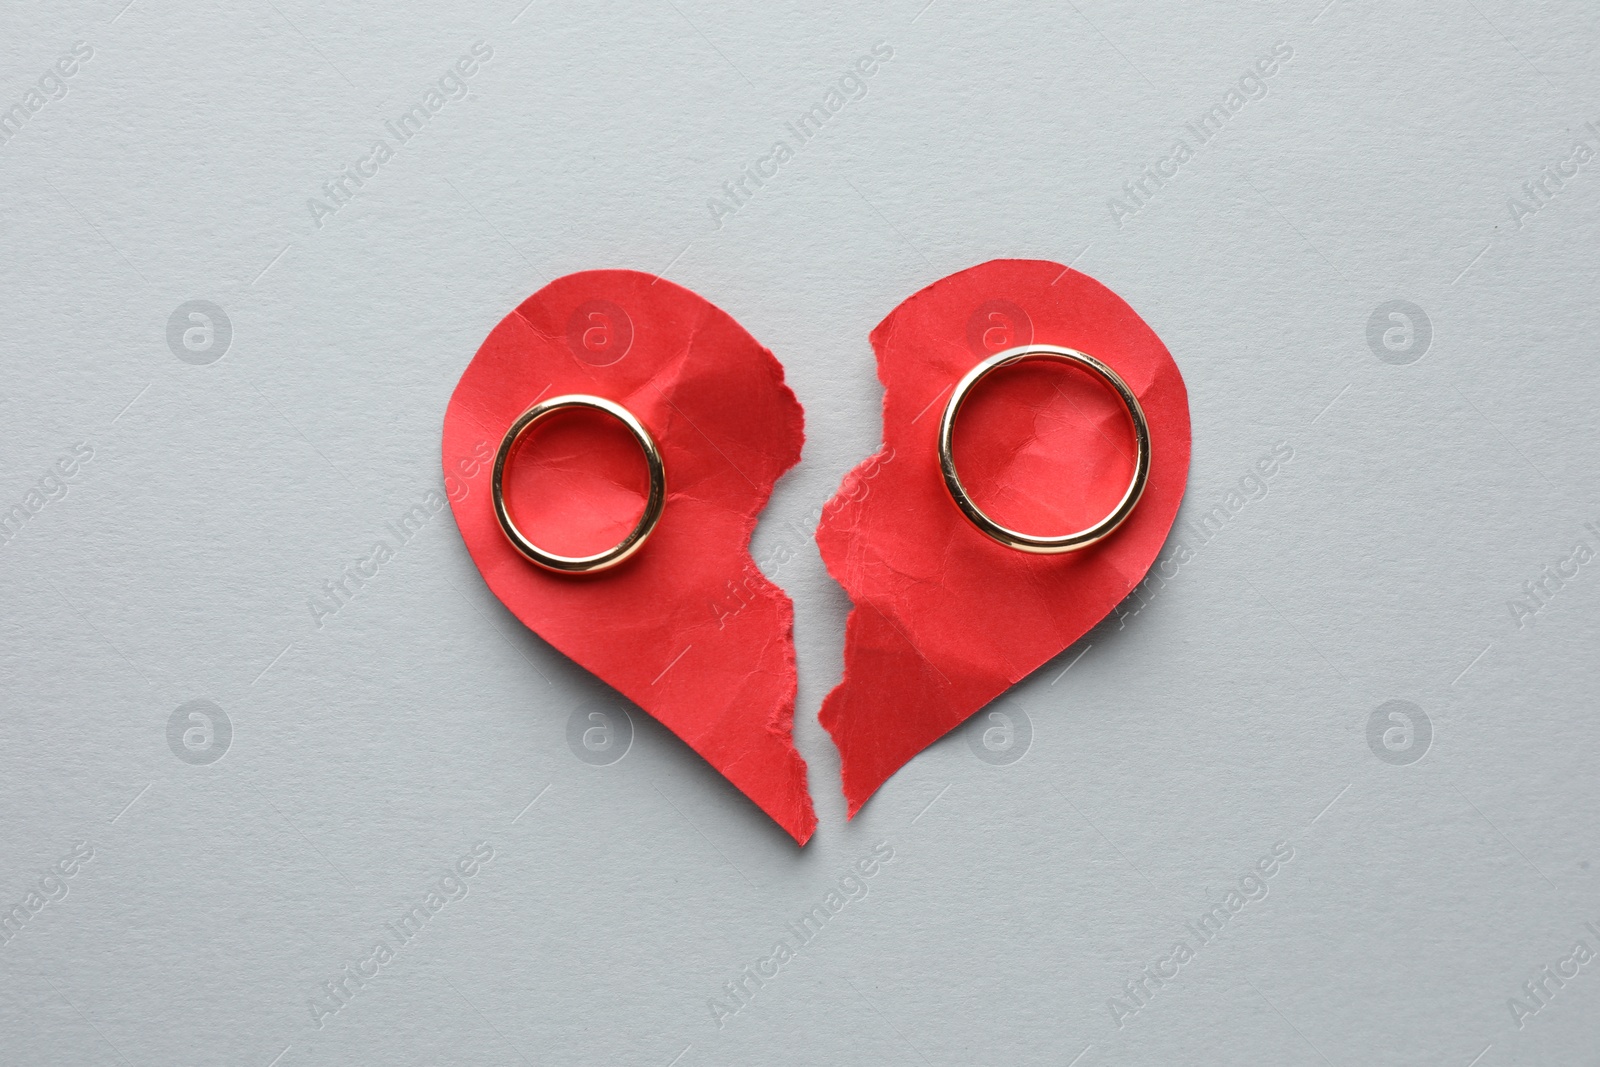 Photo of Halves of torn red paper heart and wedding rings on white background, top view. Broken heart